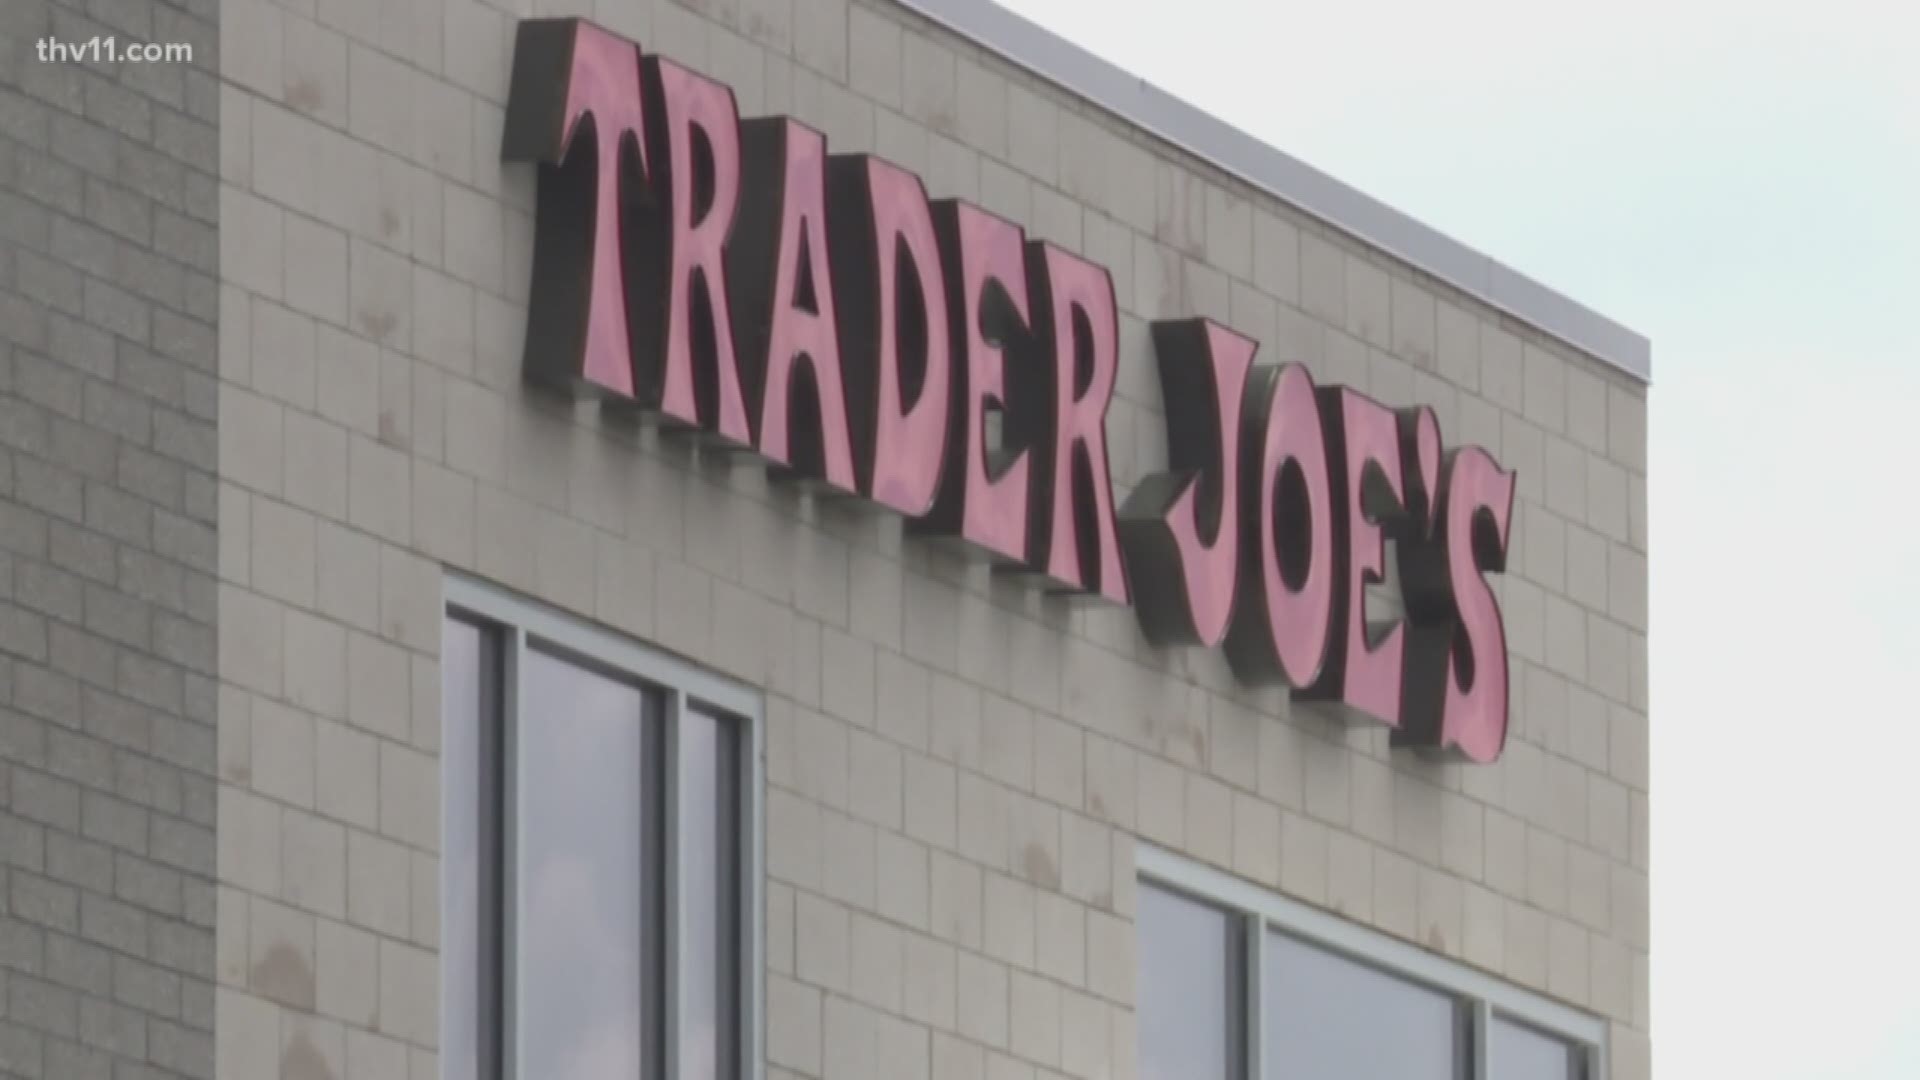 The City of Little Rock has approved a permit for Trader Joe's.